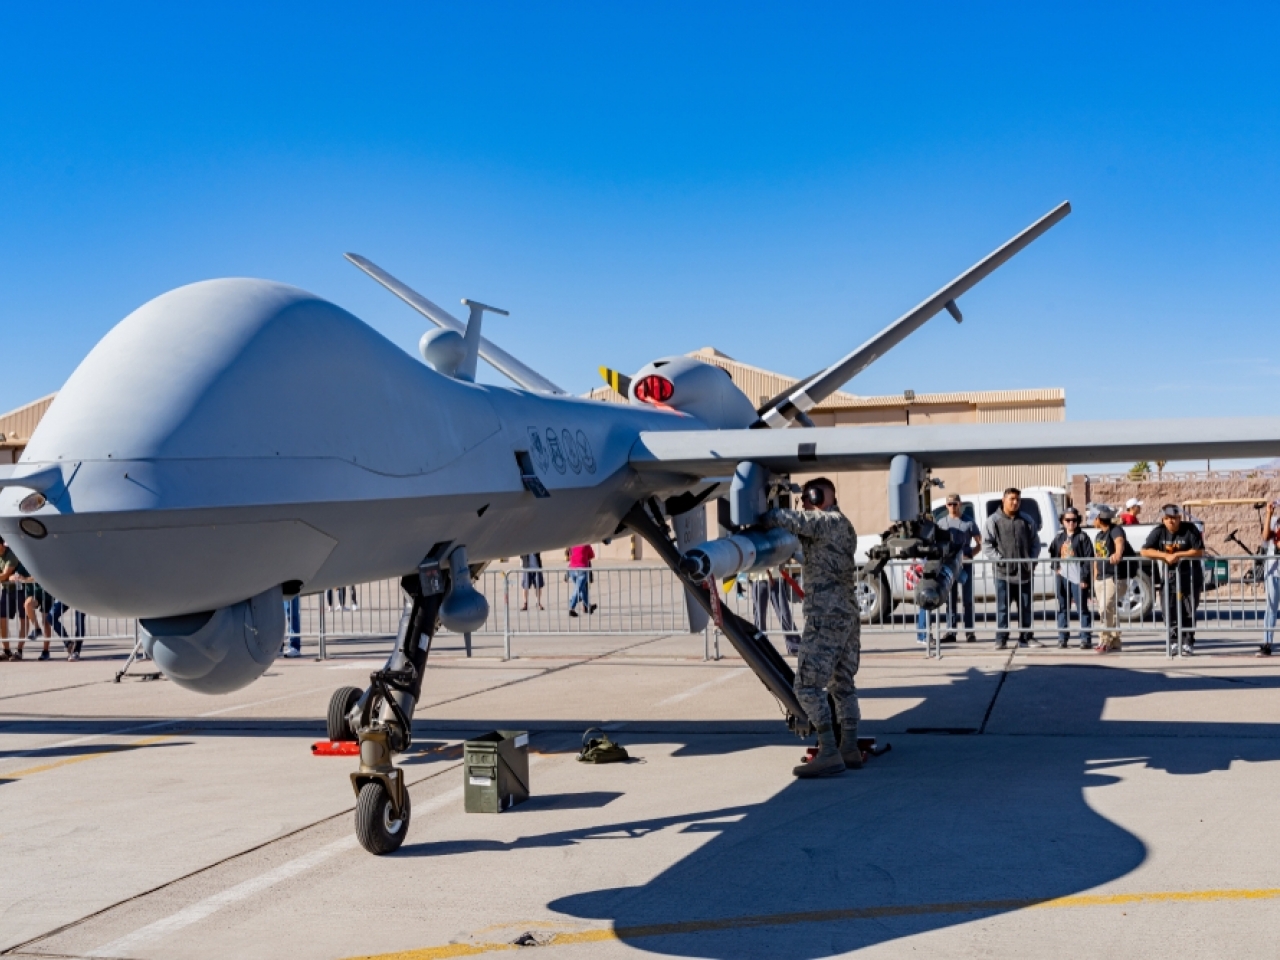 The unmanned MQ-9 Reaper drone can be armed with Hellfire missiles as well as laser-guided bombs. Photo: Shutterstock